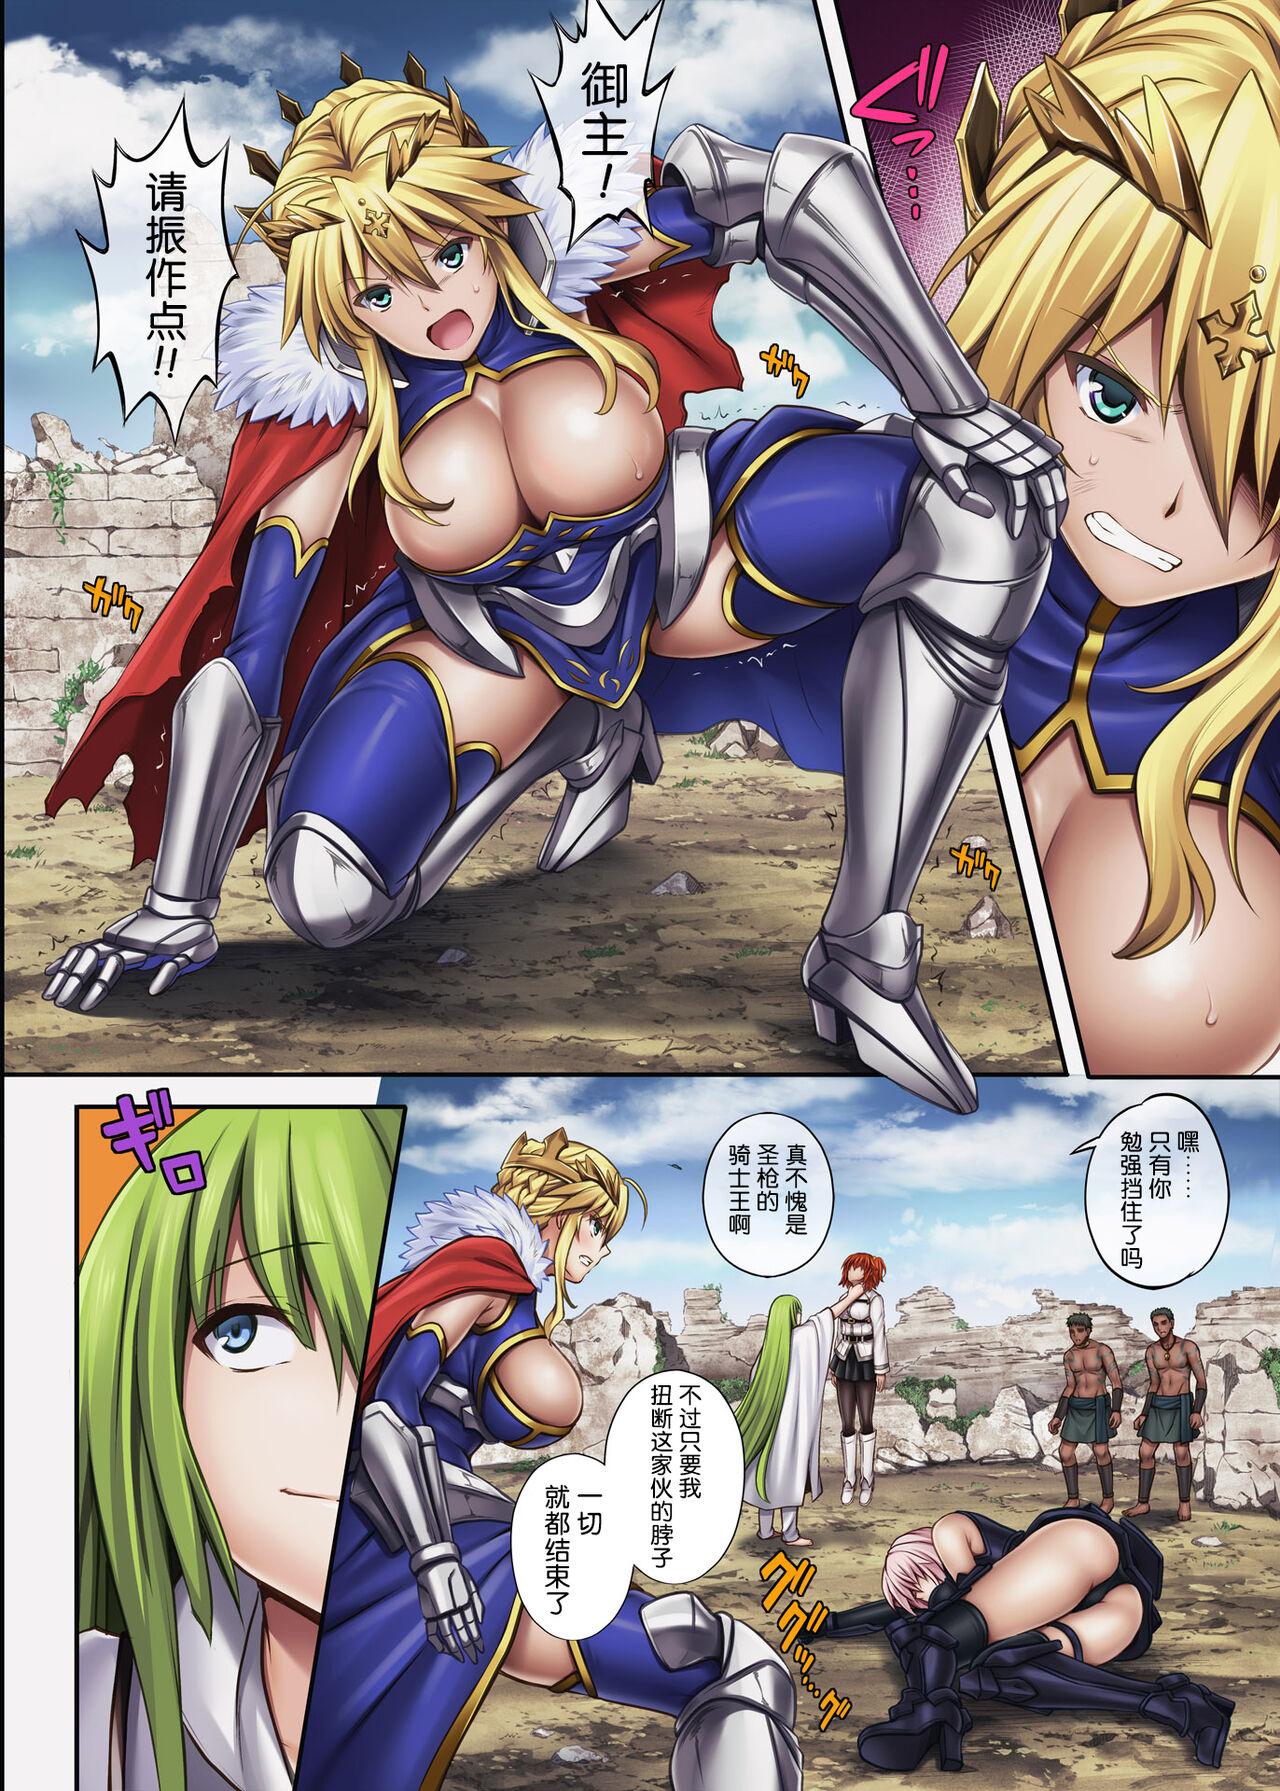 Big Ass Cyclone no Doujinshi Full Color Pack 4 - Fate grand order Couple Sex - Page 4